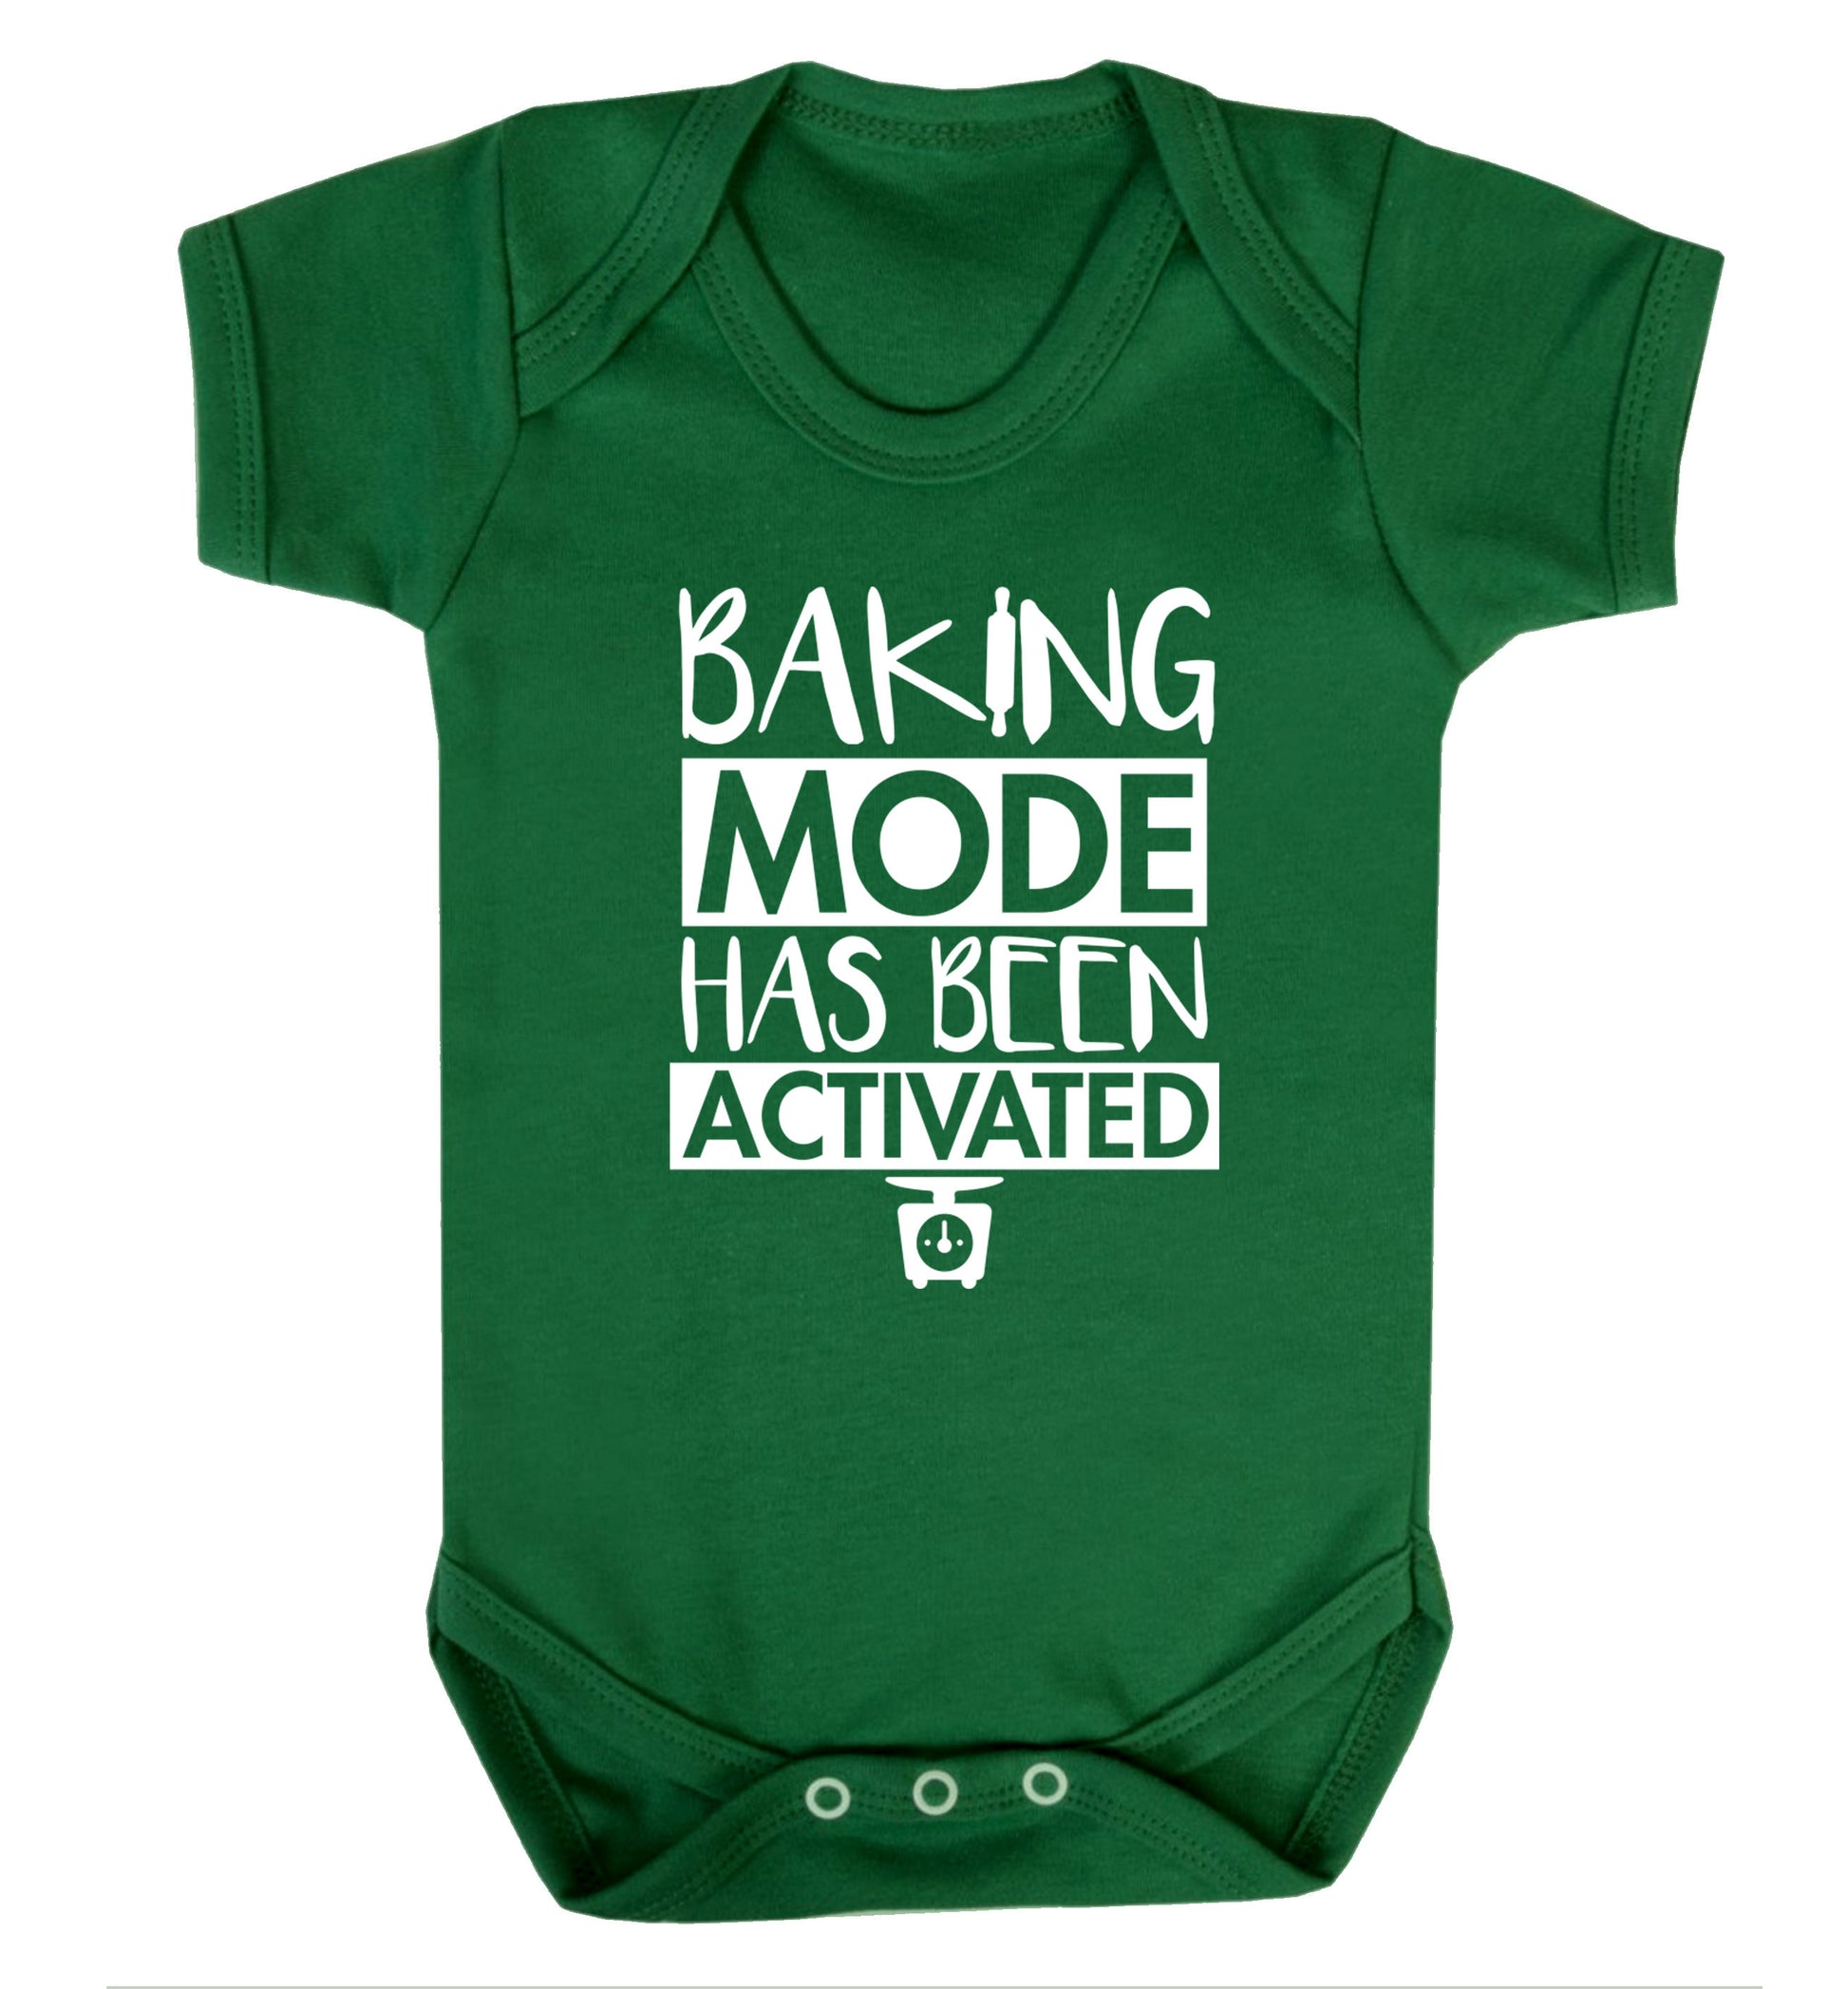 Baking mode has been activated Baby Vest green 18-24 months